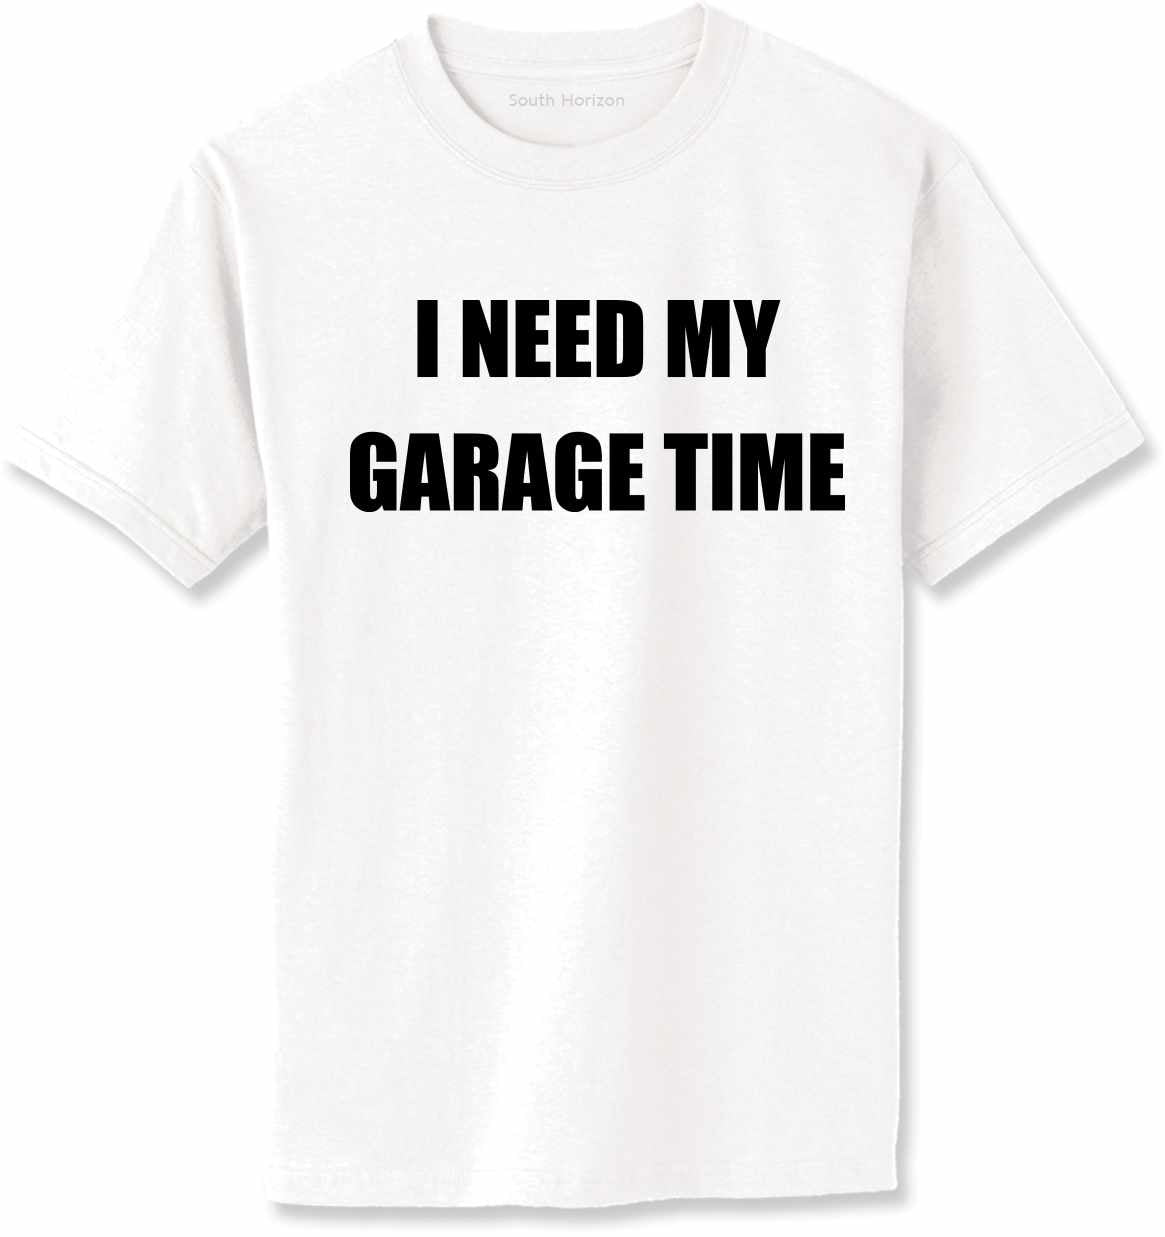 I NEED MY GARAGE TIME Adult T-Shirt (#720-1)